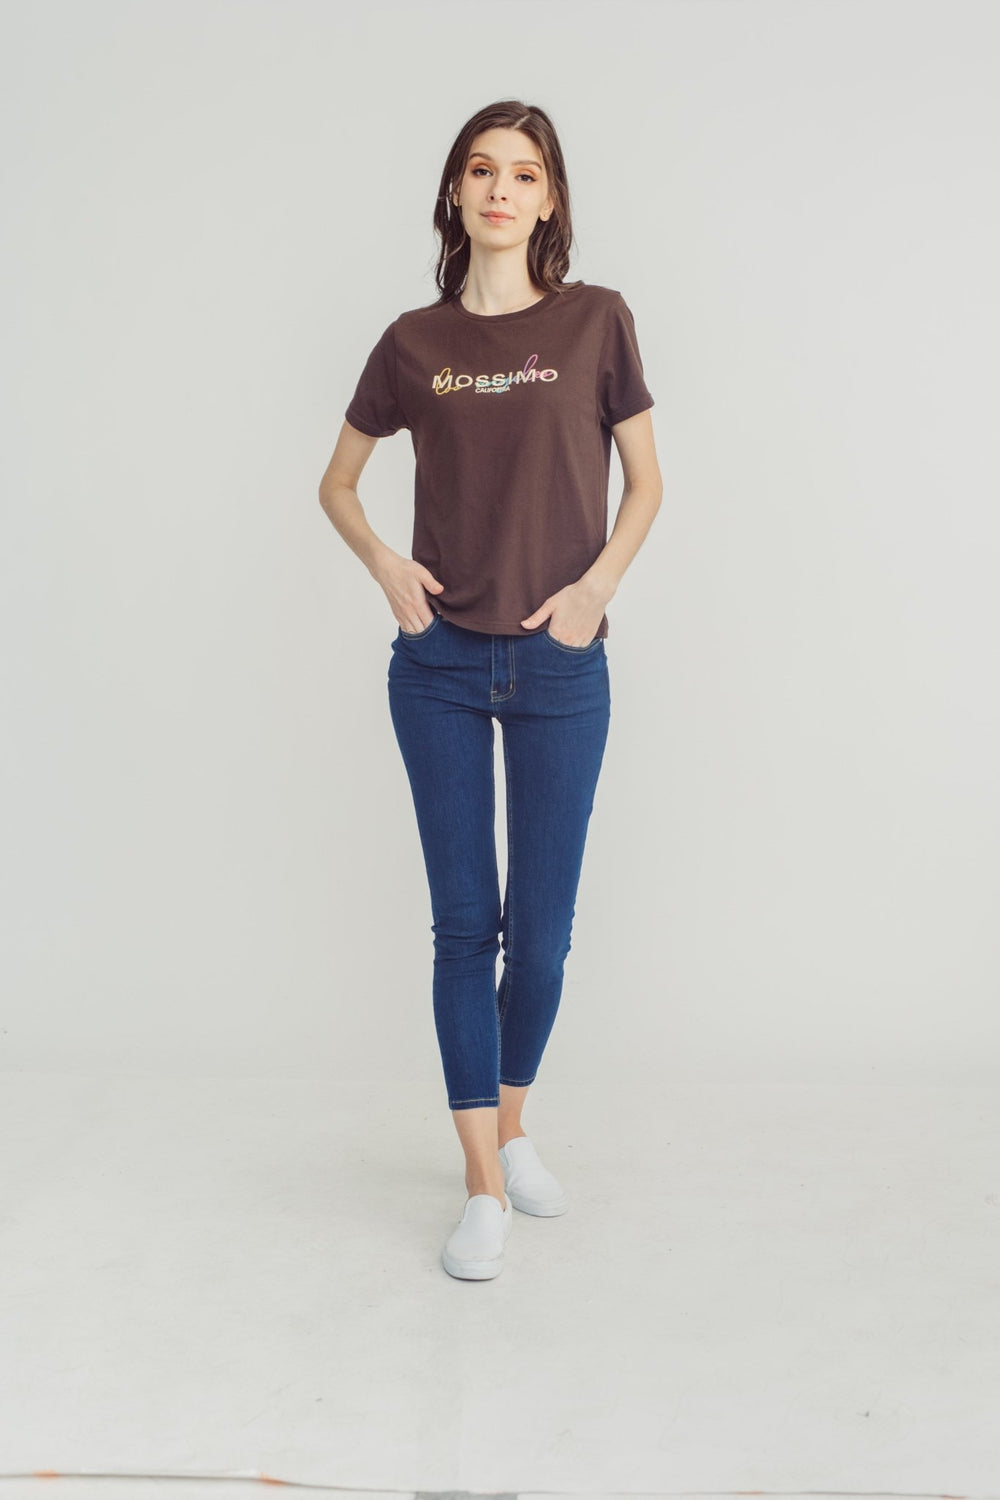 Choco Brown with Big Branding Gradient Embroidery Classic Fit Tee - Mossimo PH